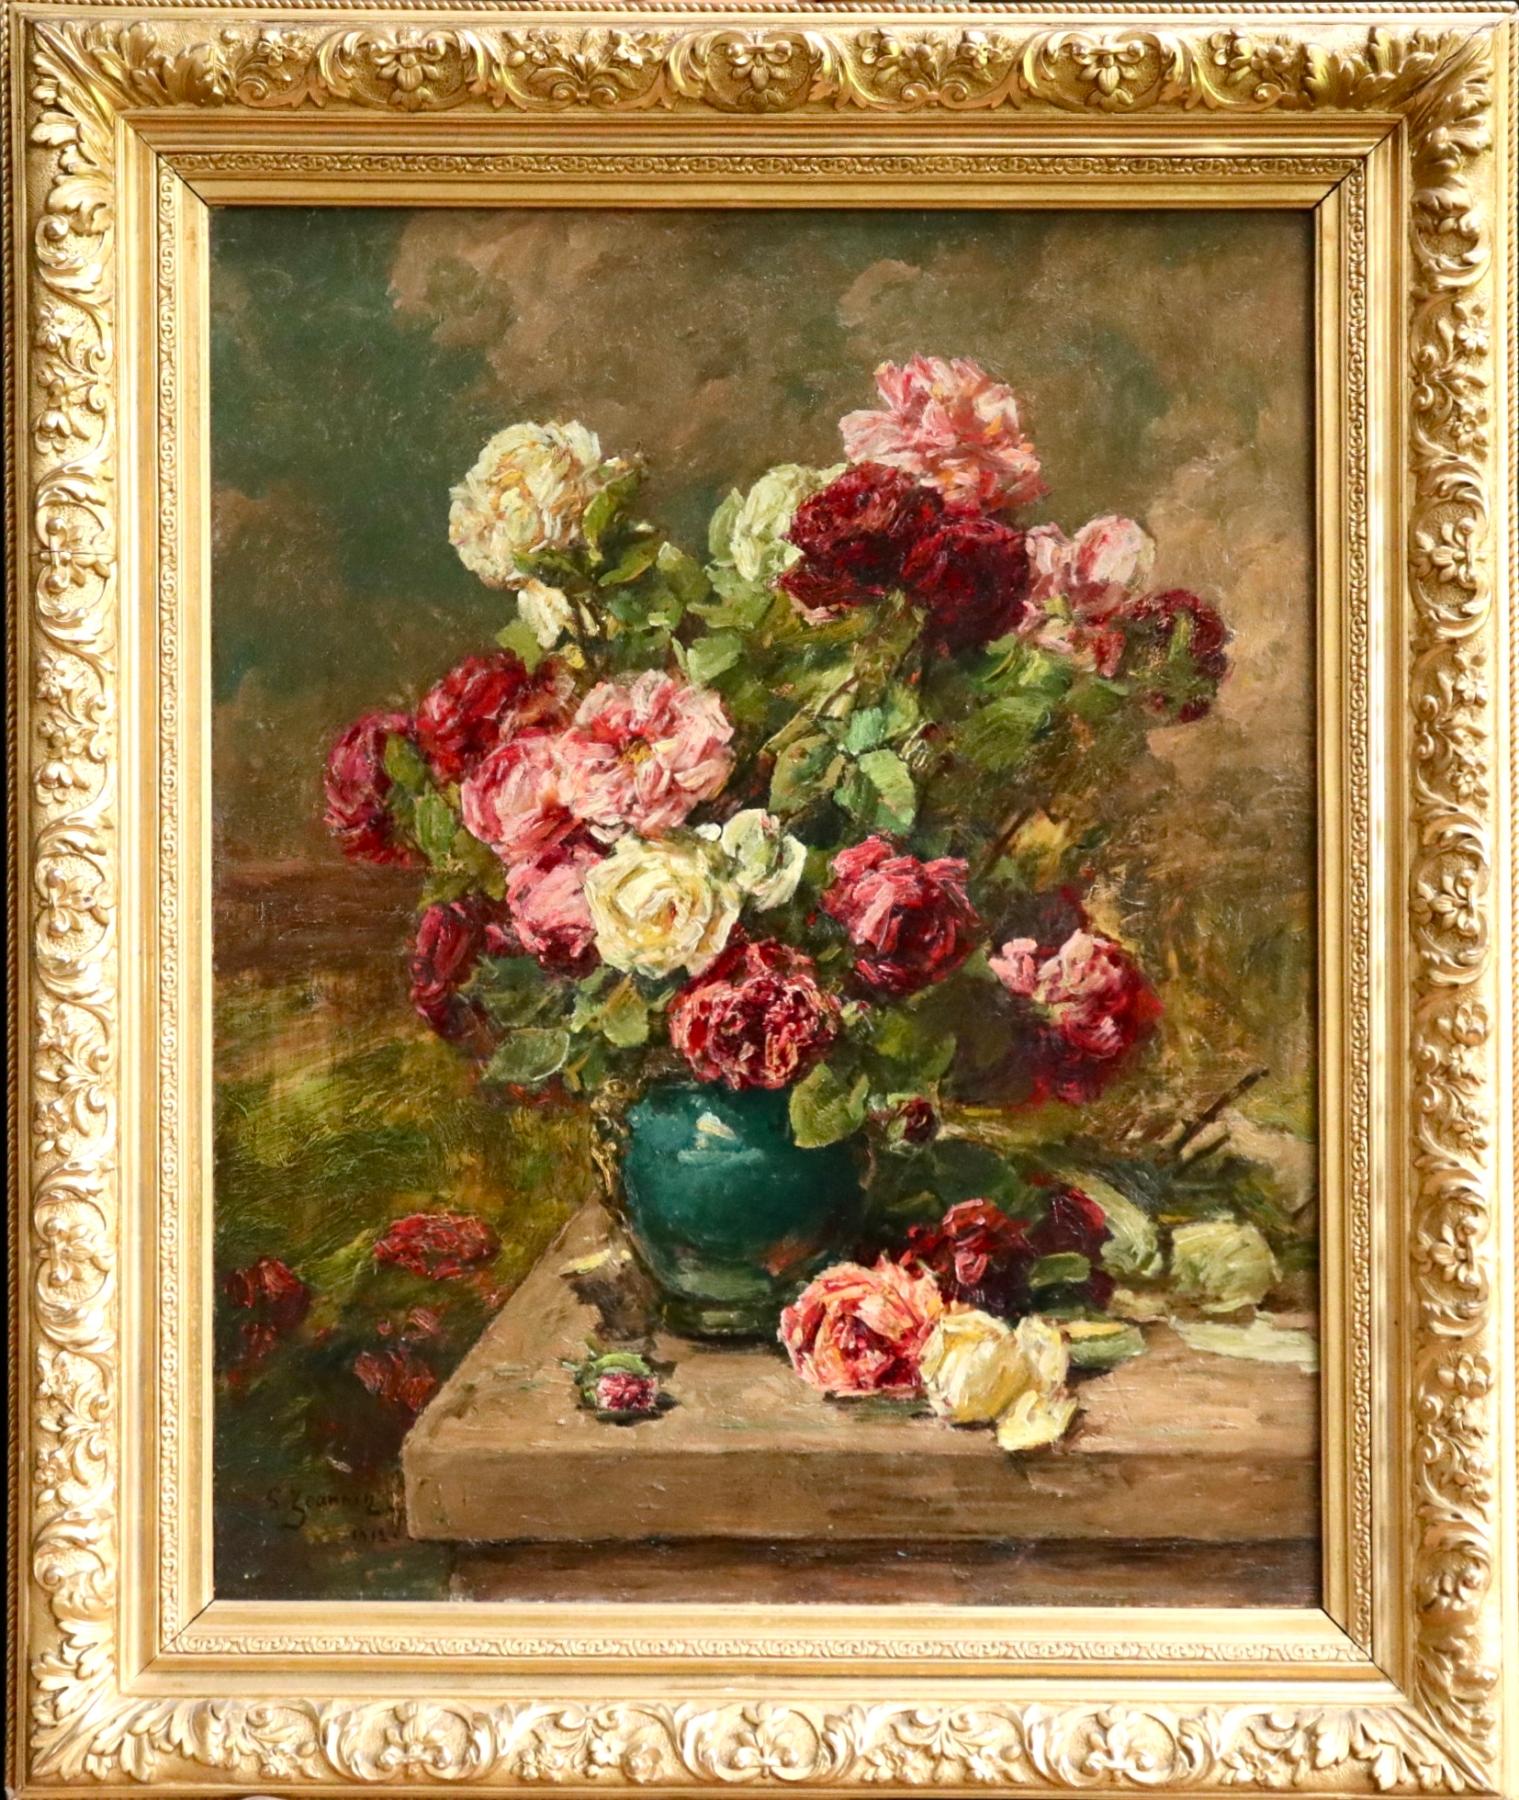 A lovely oil on canvas by Georges Jeannin depicting a green ceramic vase filled with red, pink and cream flowers on a wooden table in an interior. 

Signature:
Signed and dated lower left 

Dimensions:
Framed: 40